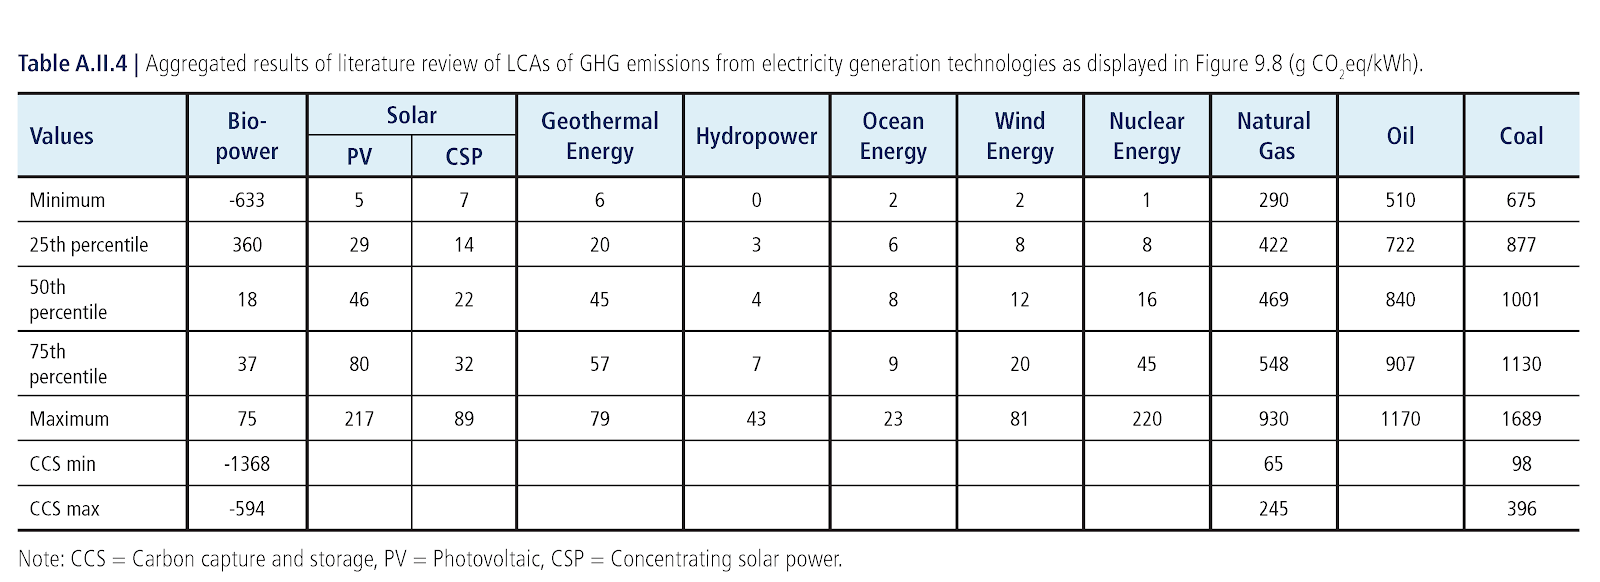 ESG_Series_Environmental_Part_4_Energy_Electricity_and_Emissions-IPCC Data on Carbon Intensity.png